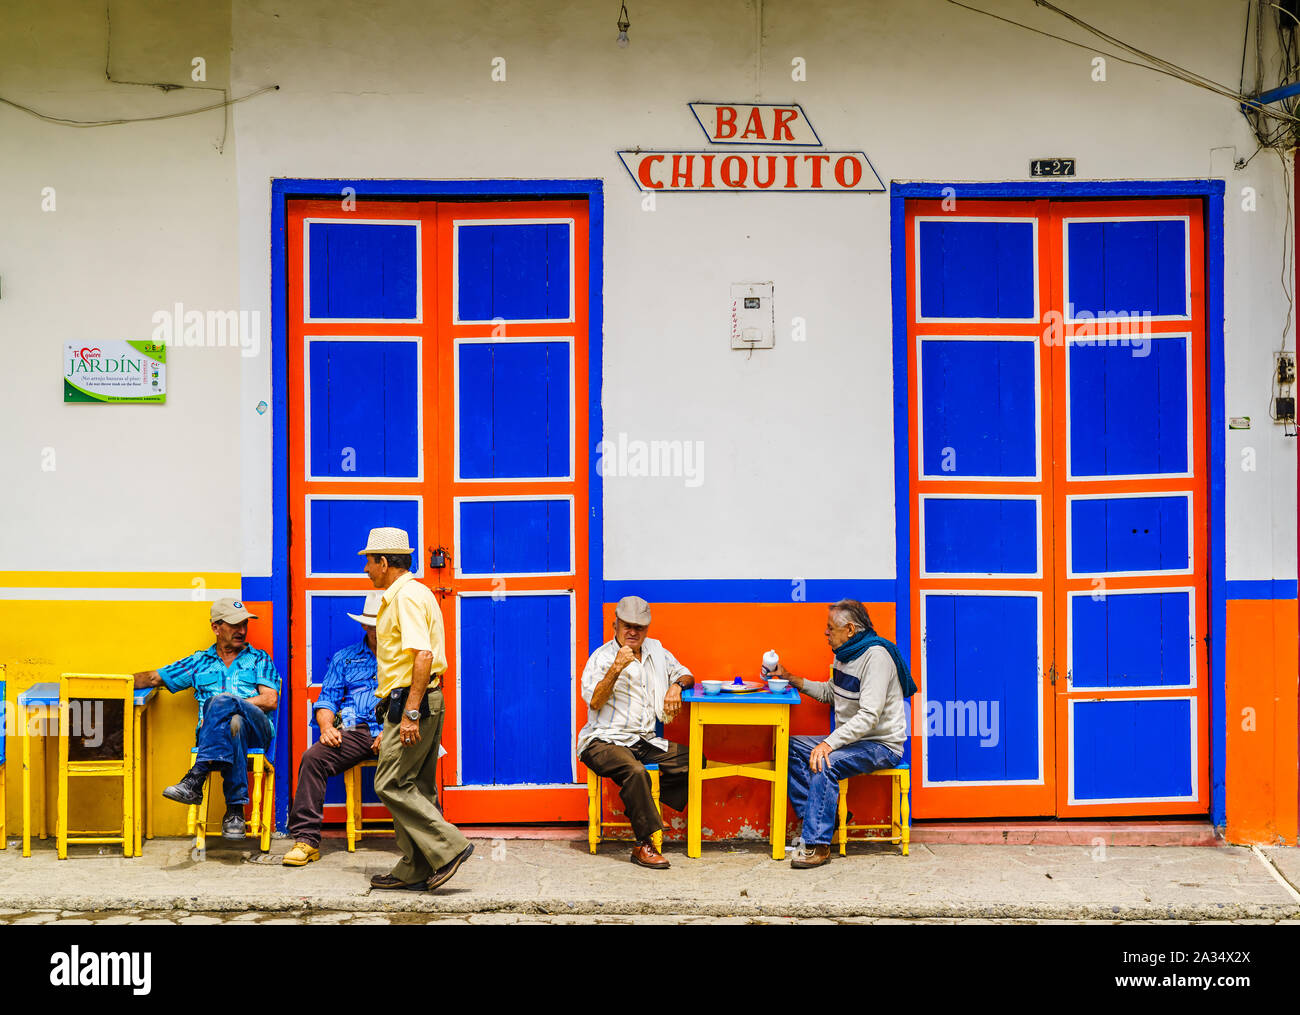 El Jardin, Colombia - March 27, 2019 - View on people sitting in front of a bar in the center of the town Stock Photo